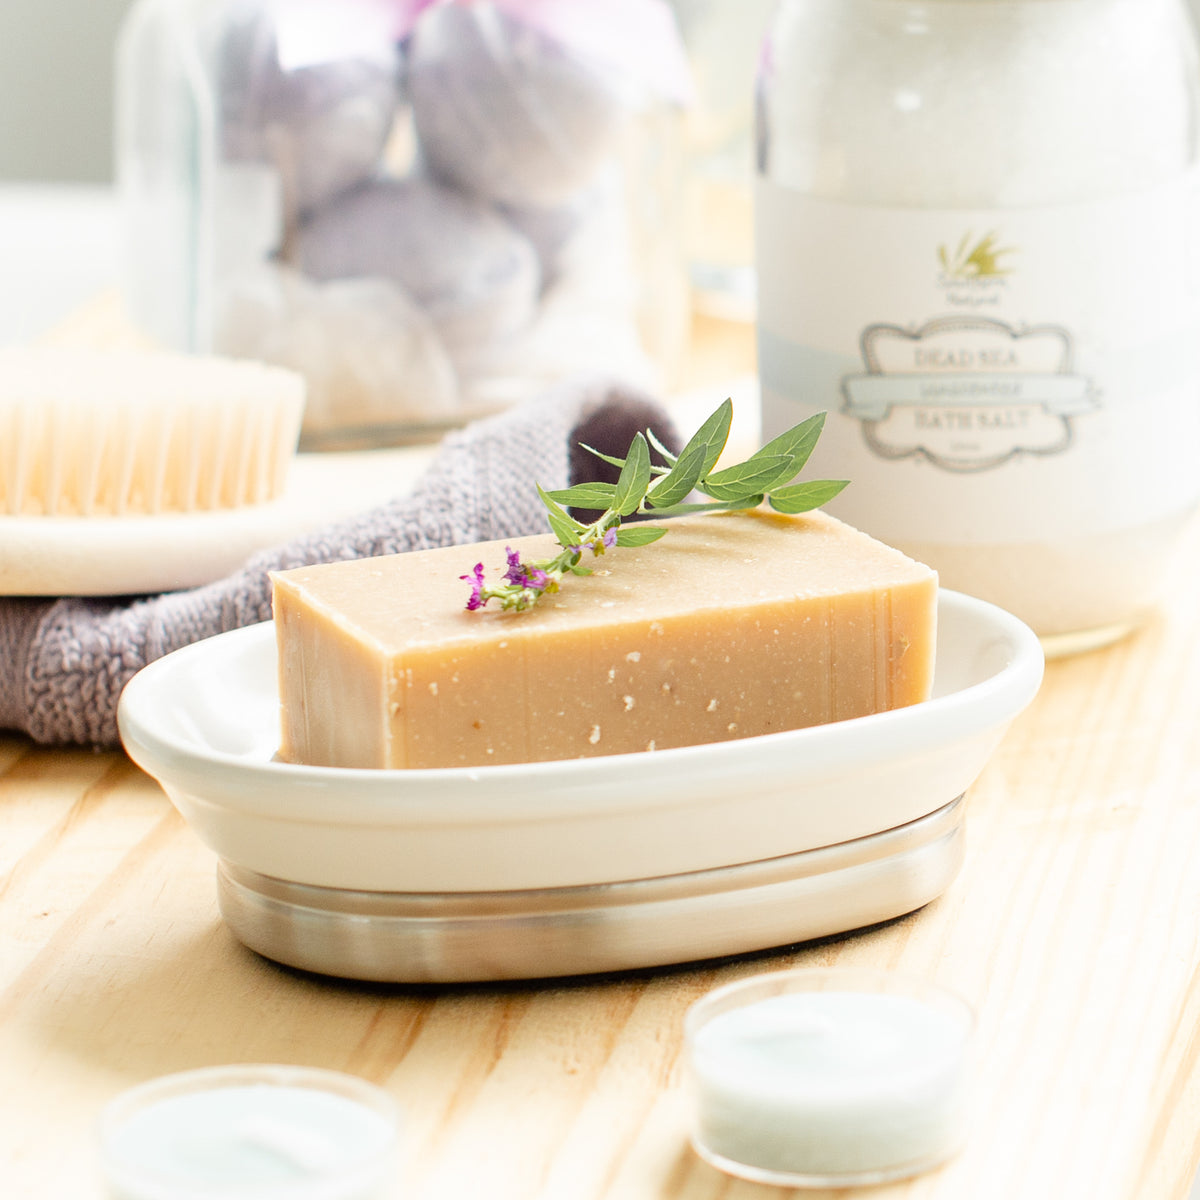 The Advantages Of Using All-Natural, Handmade Soap